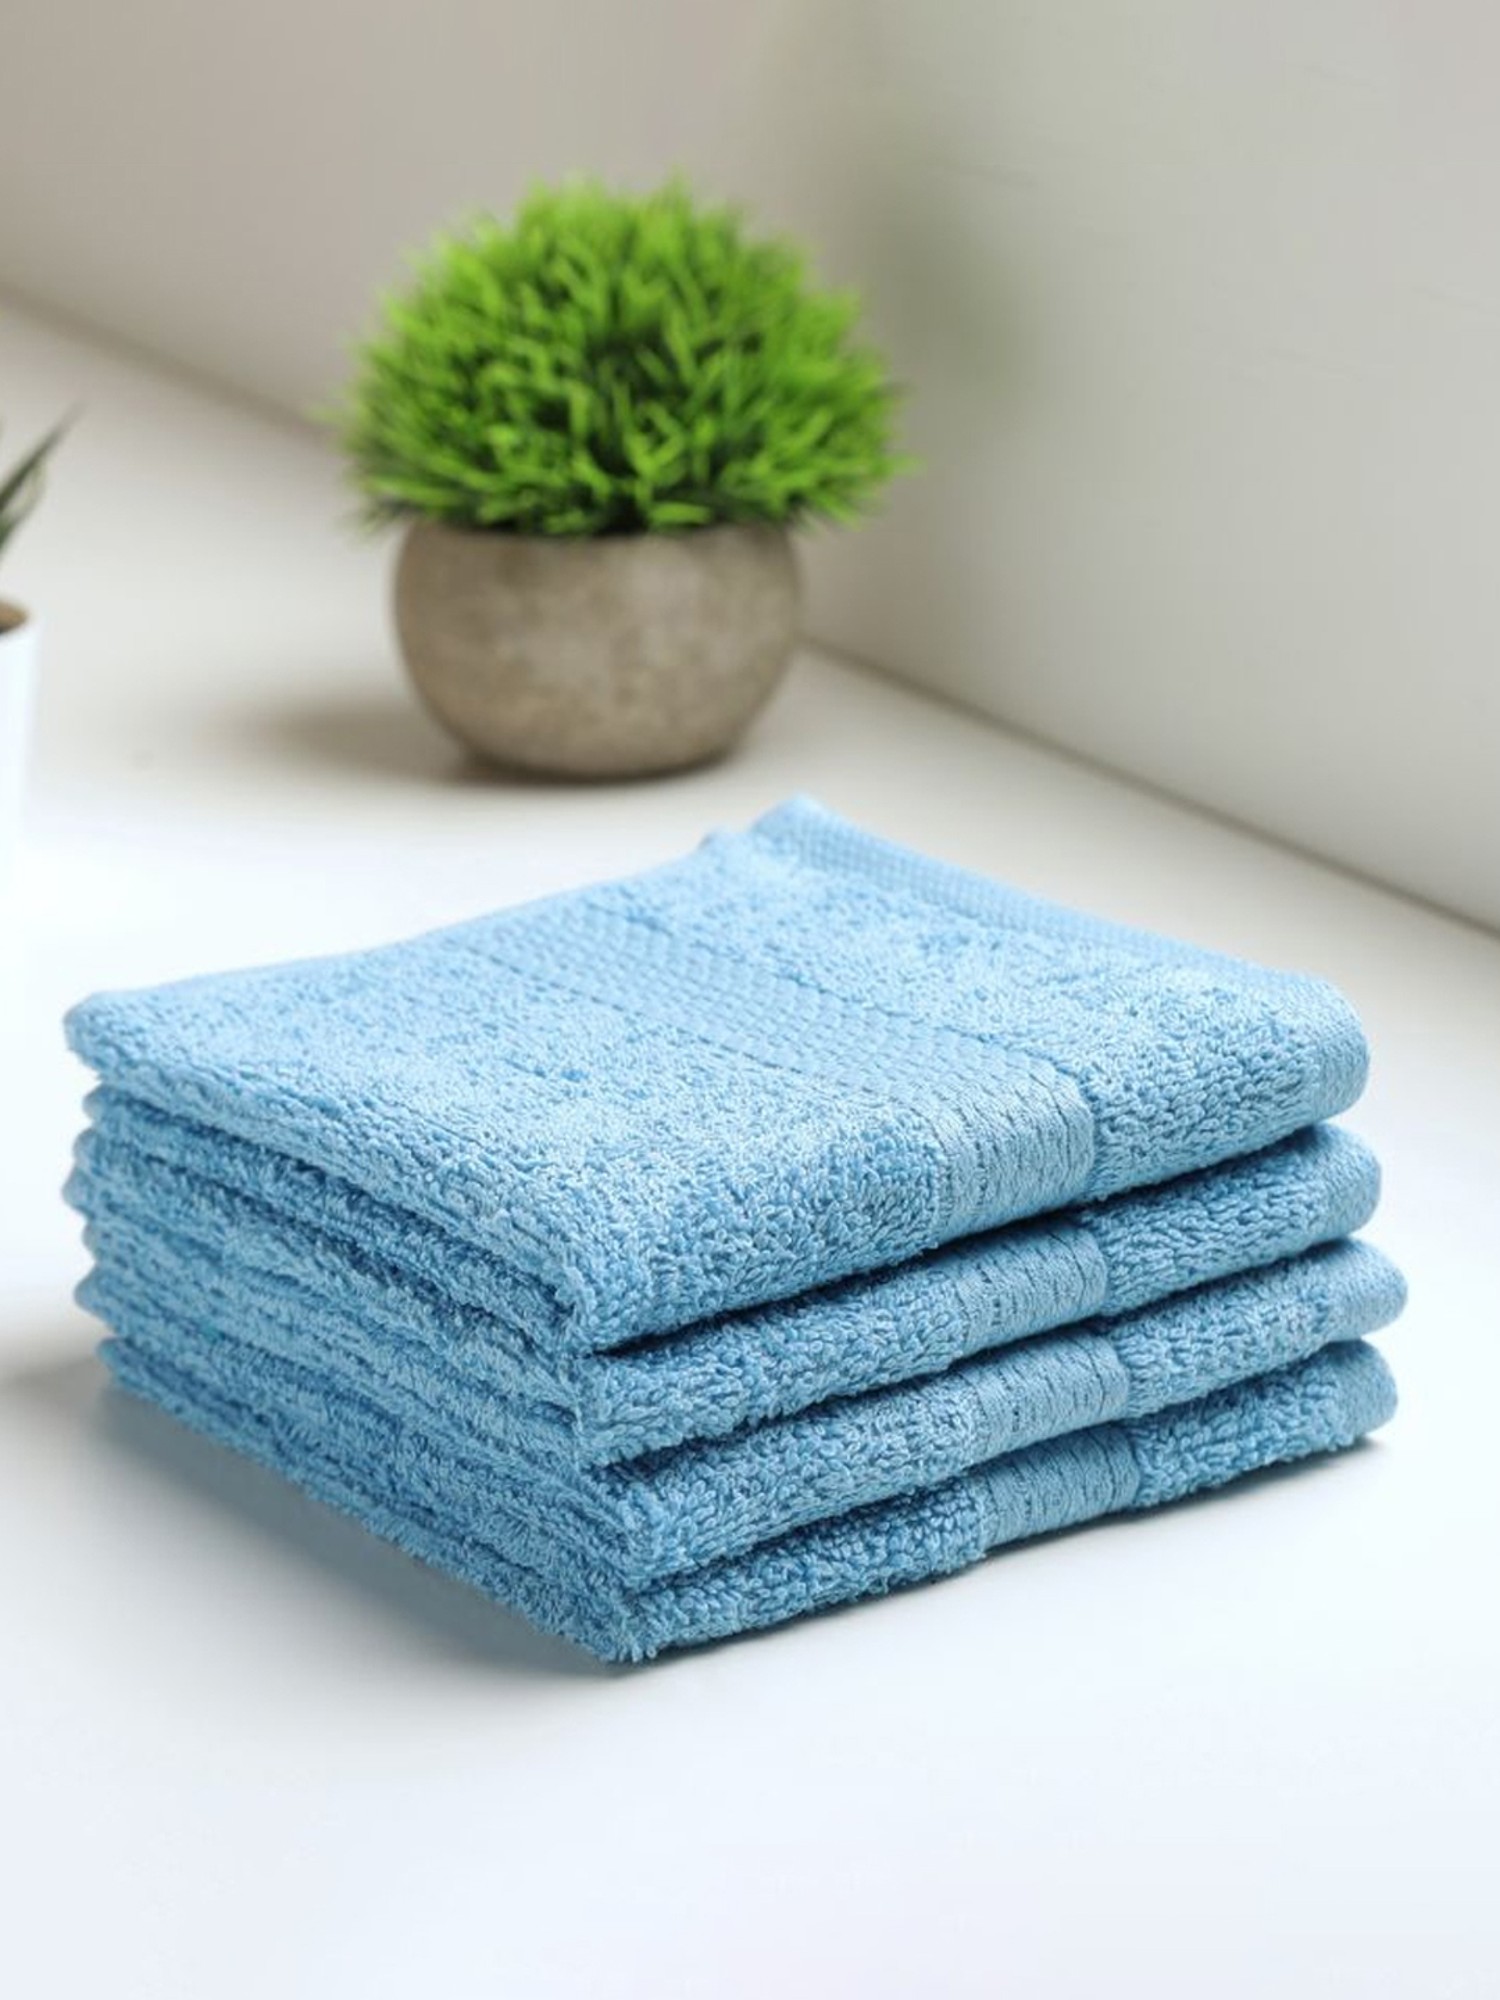 Tata towel - Buy the best product with free shipping on AliExpress